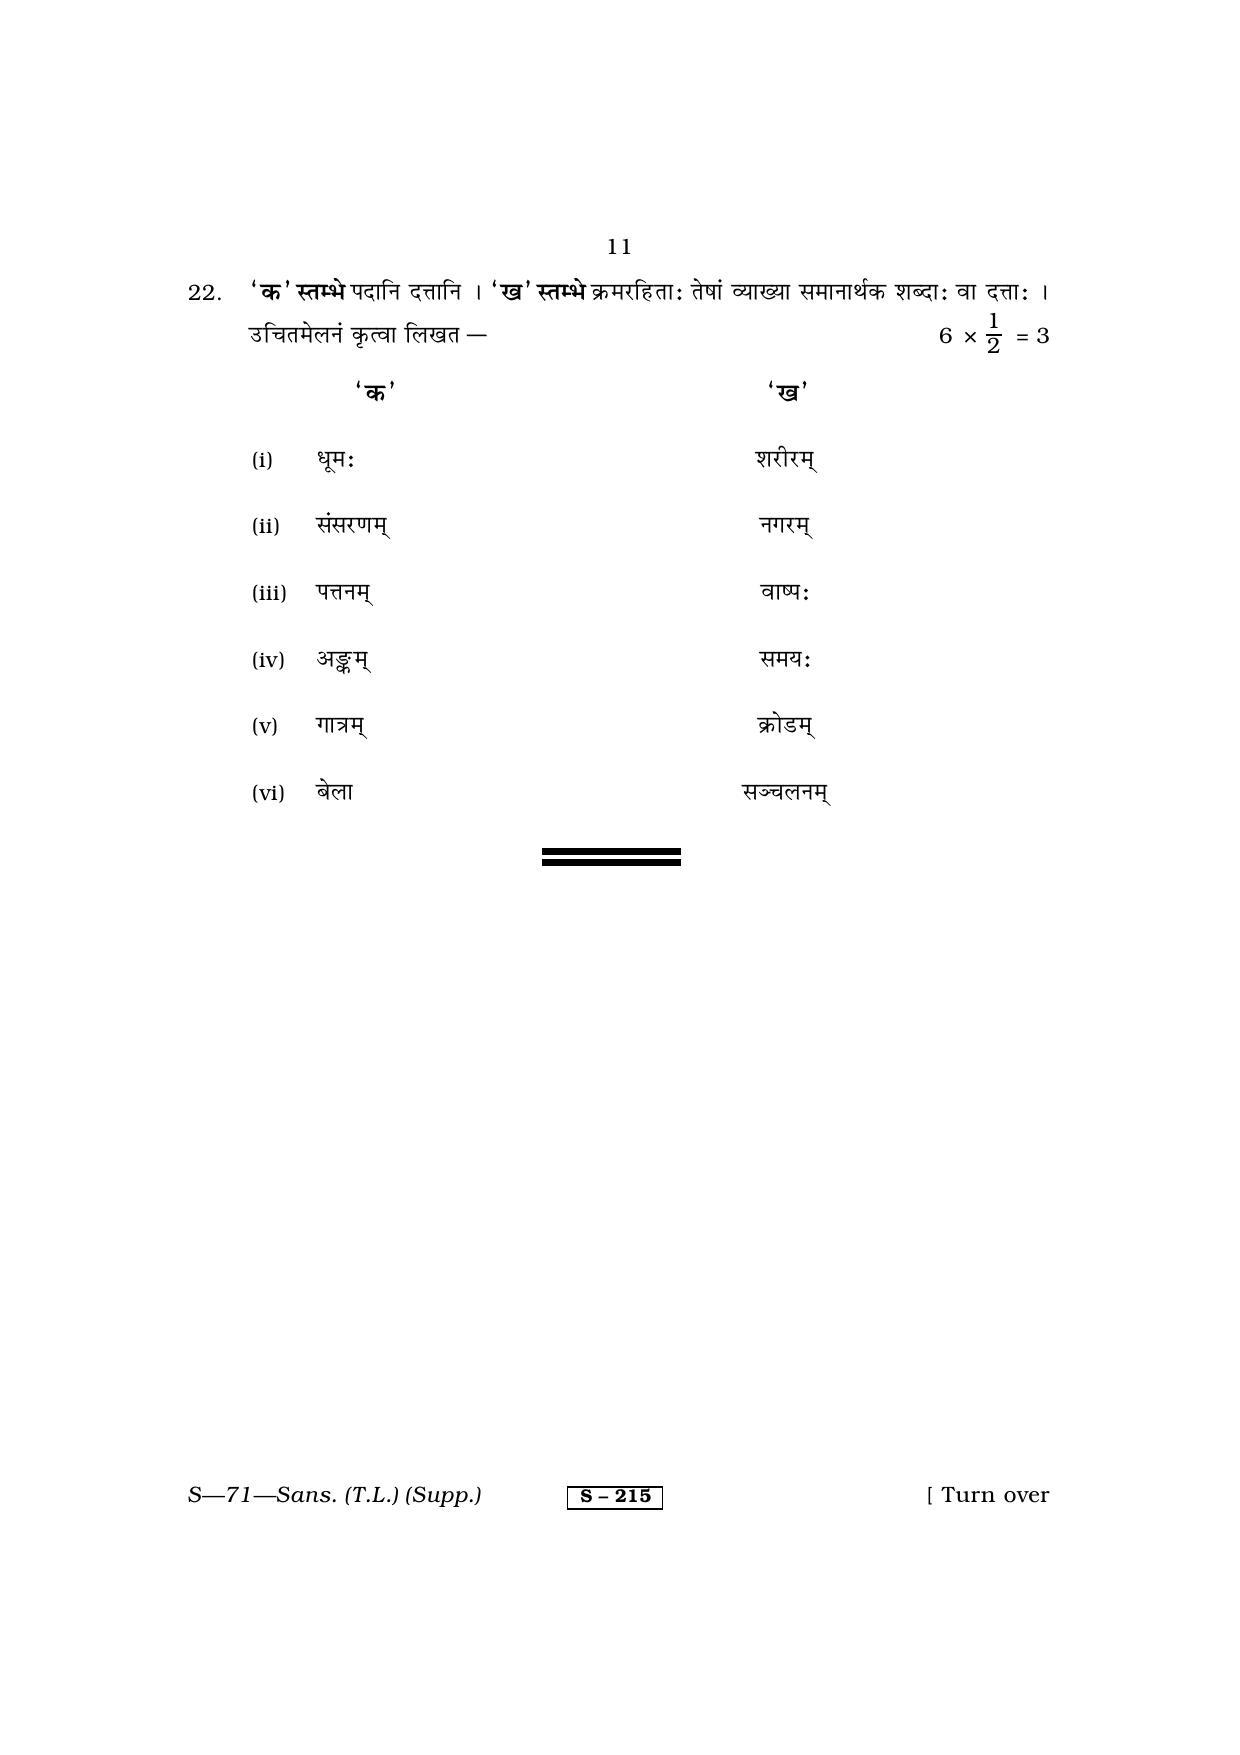 RBSE Class 10 Sanskrit (T.L.) Supplementary 2013 Question Paper - Page 11